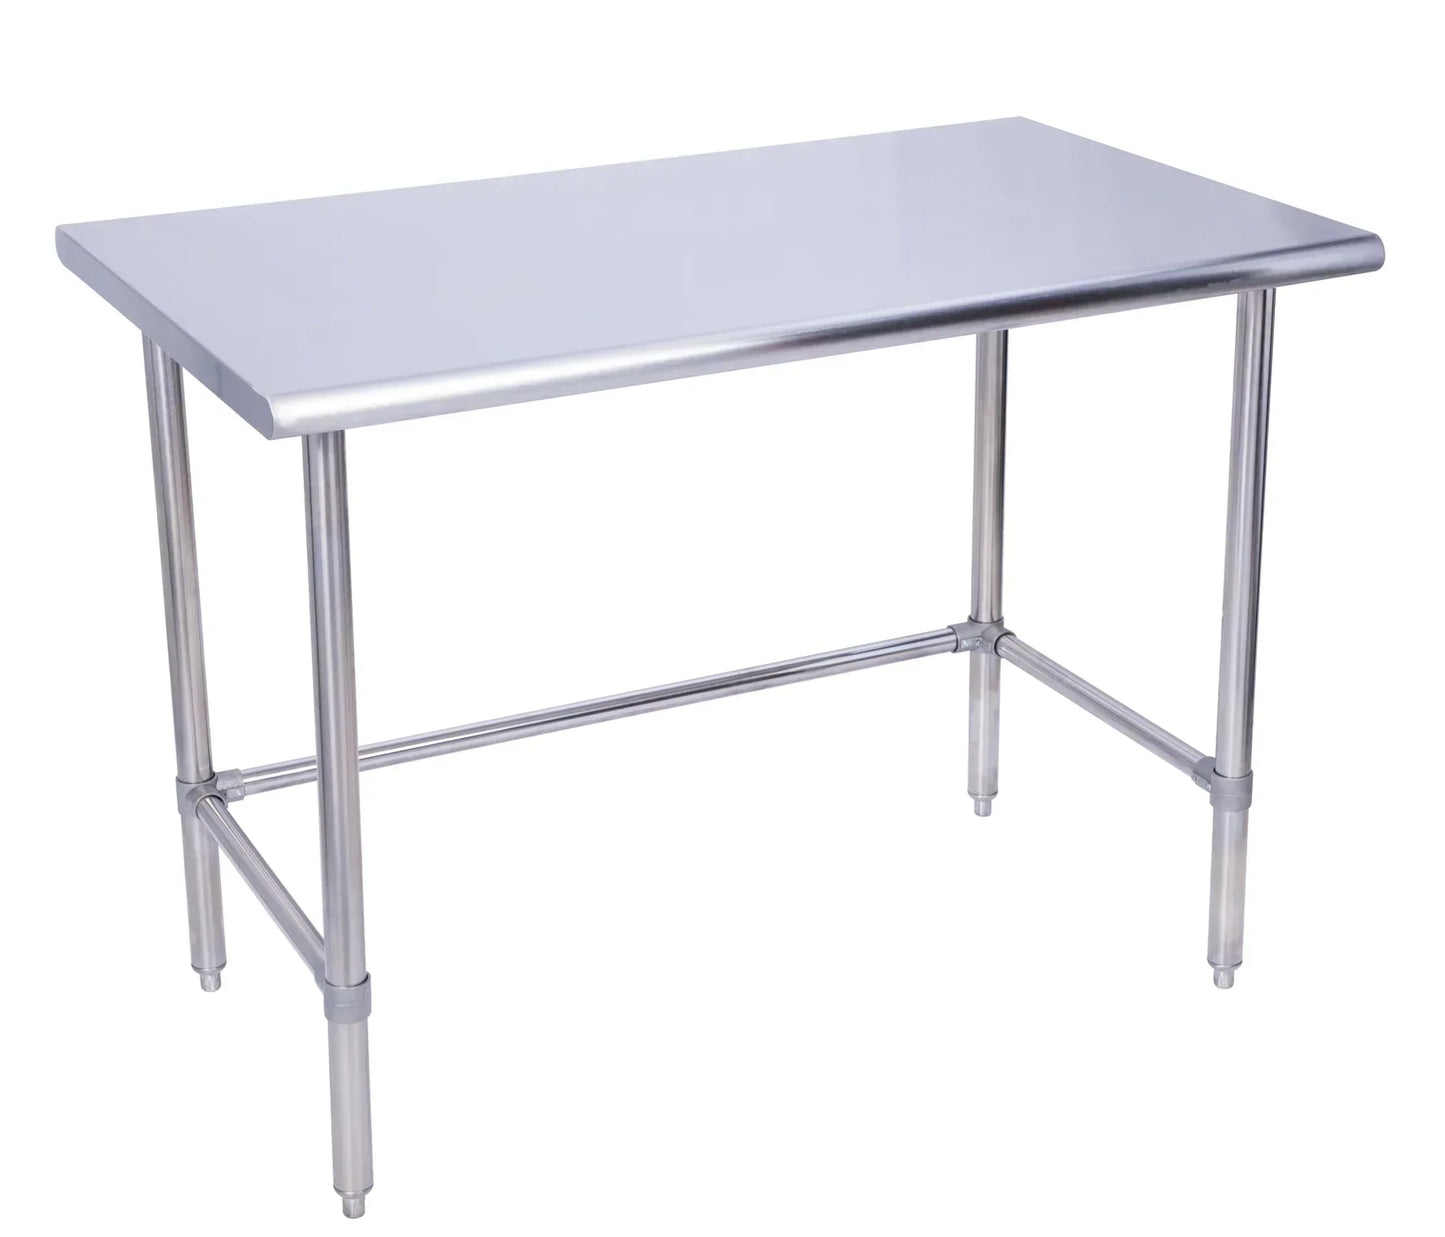 KCS WSCB-3060 30" x 60" Stainless Steel Work Table With Cross Bar